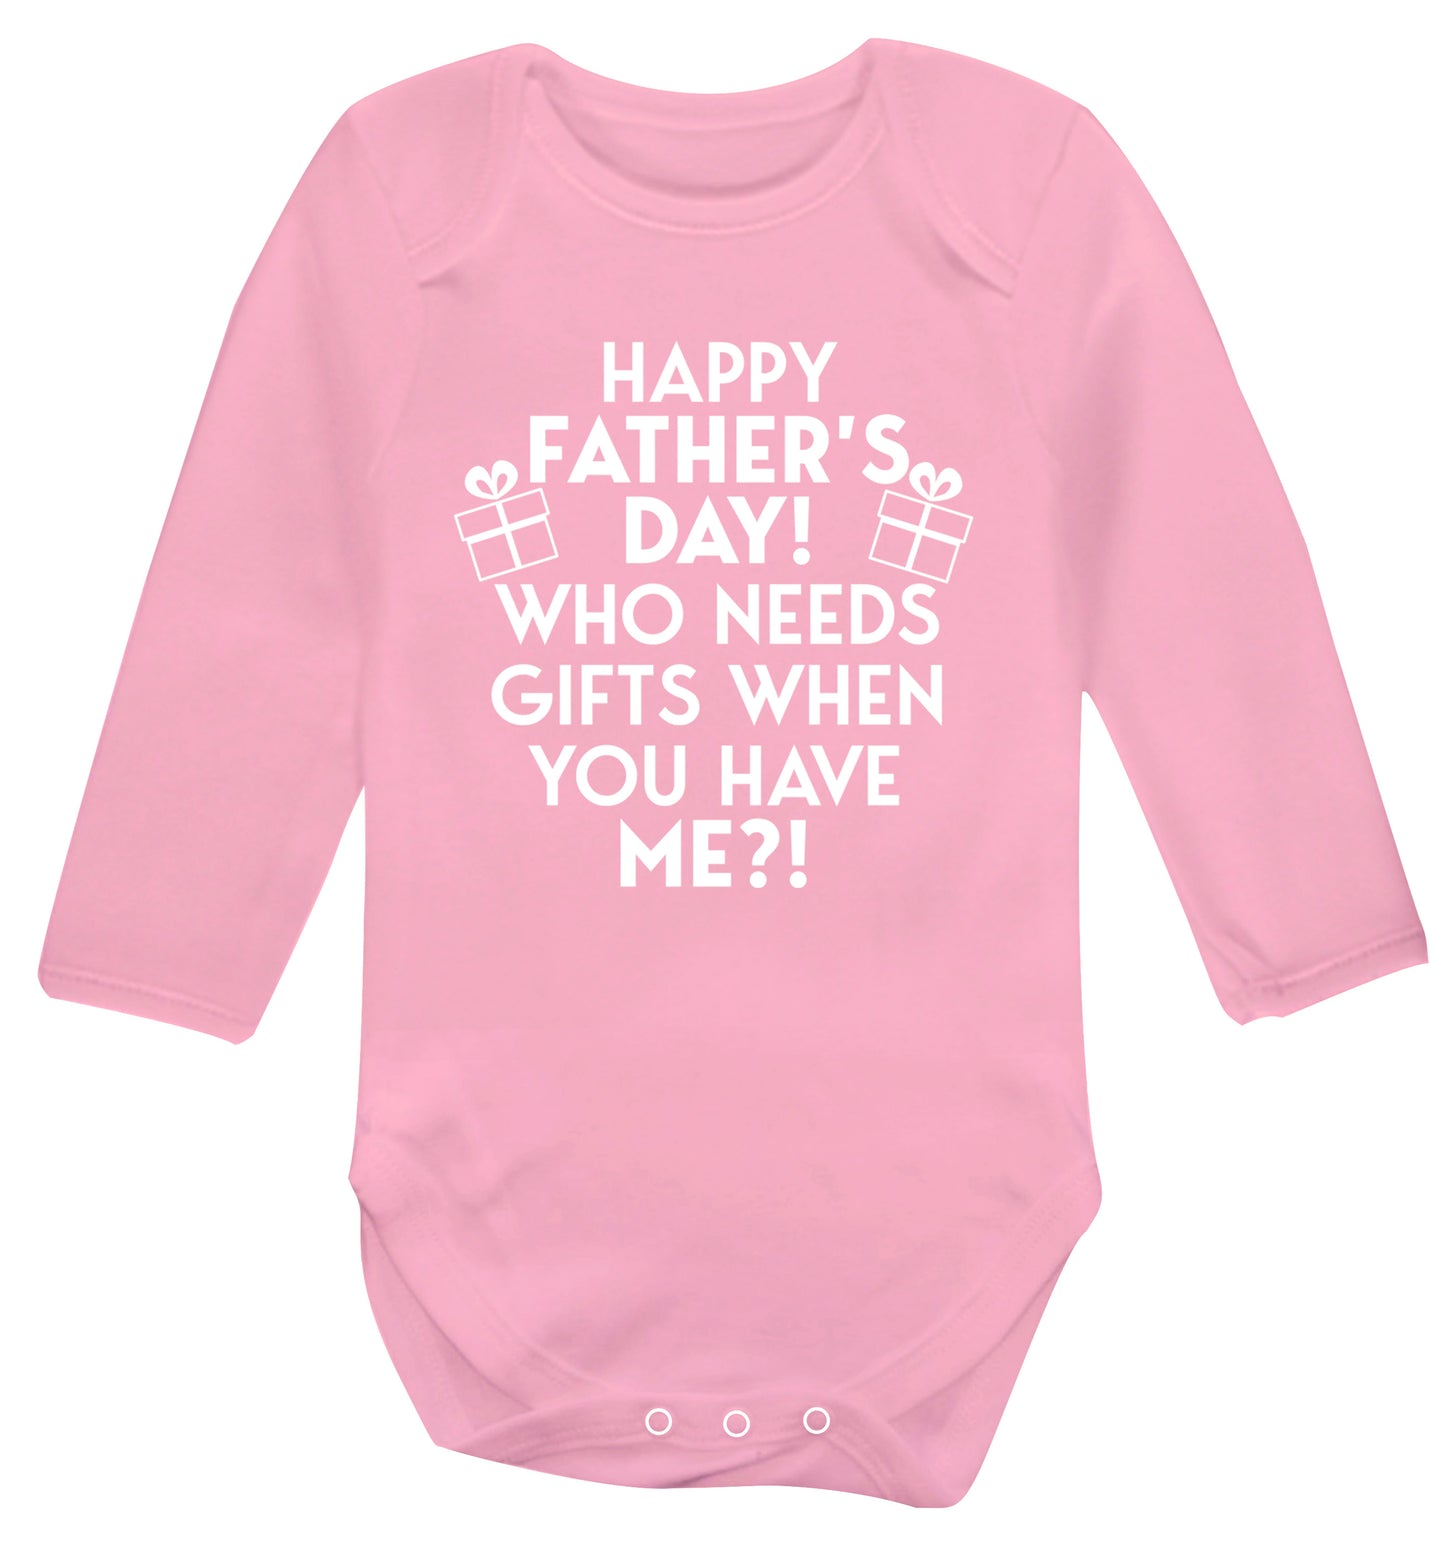 Happy Father's day, who needs a present when you have me Baby Vest long sleeved pale pink 6-12 months